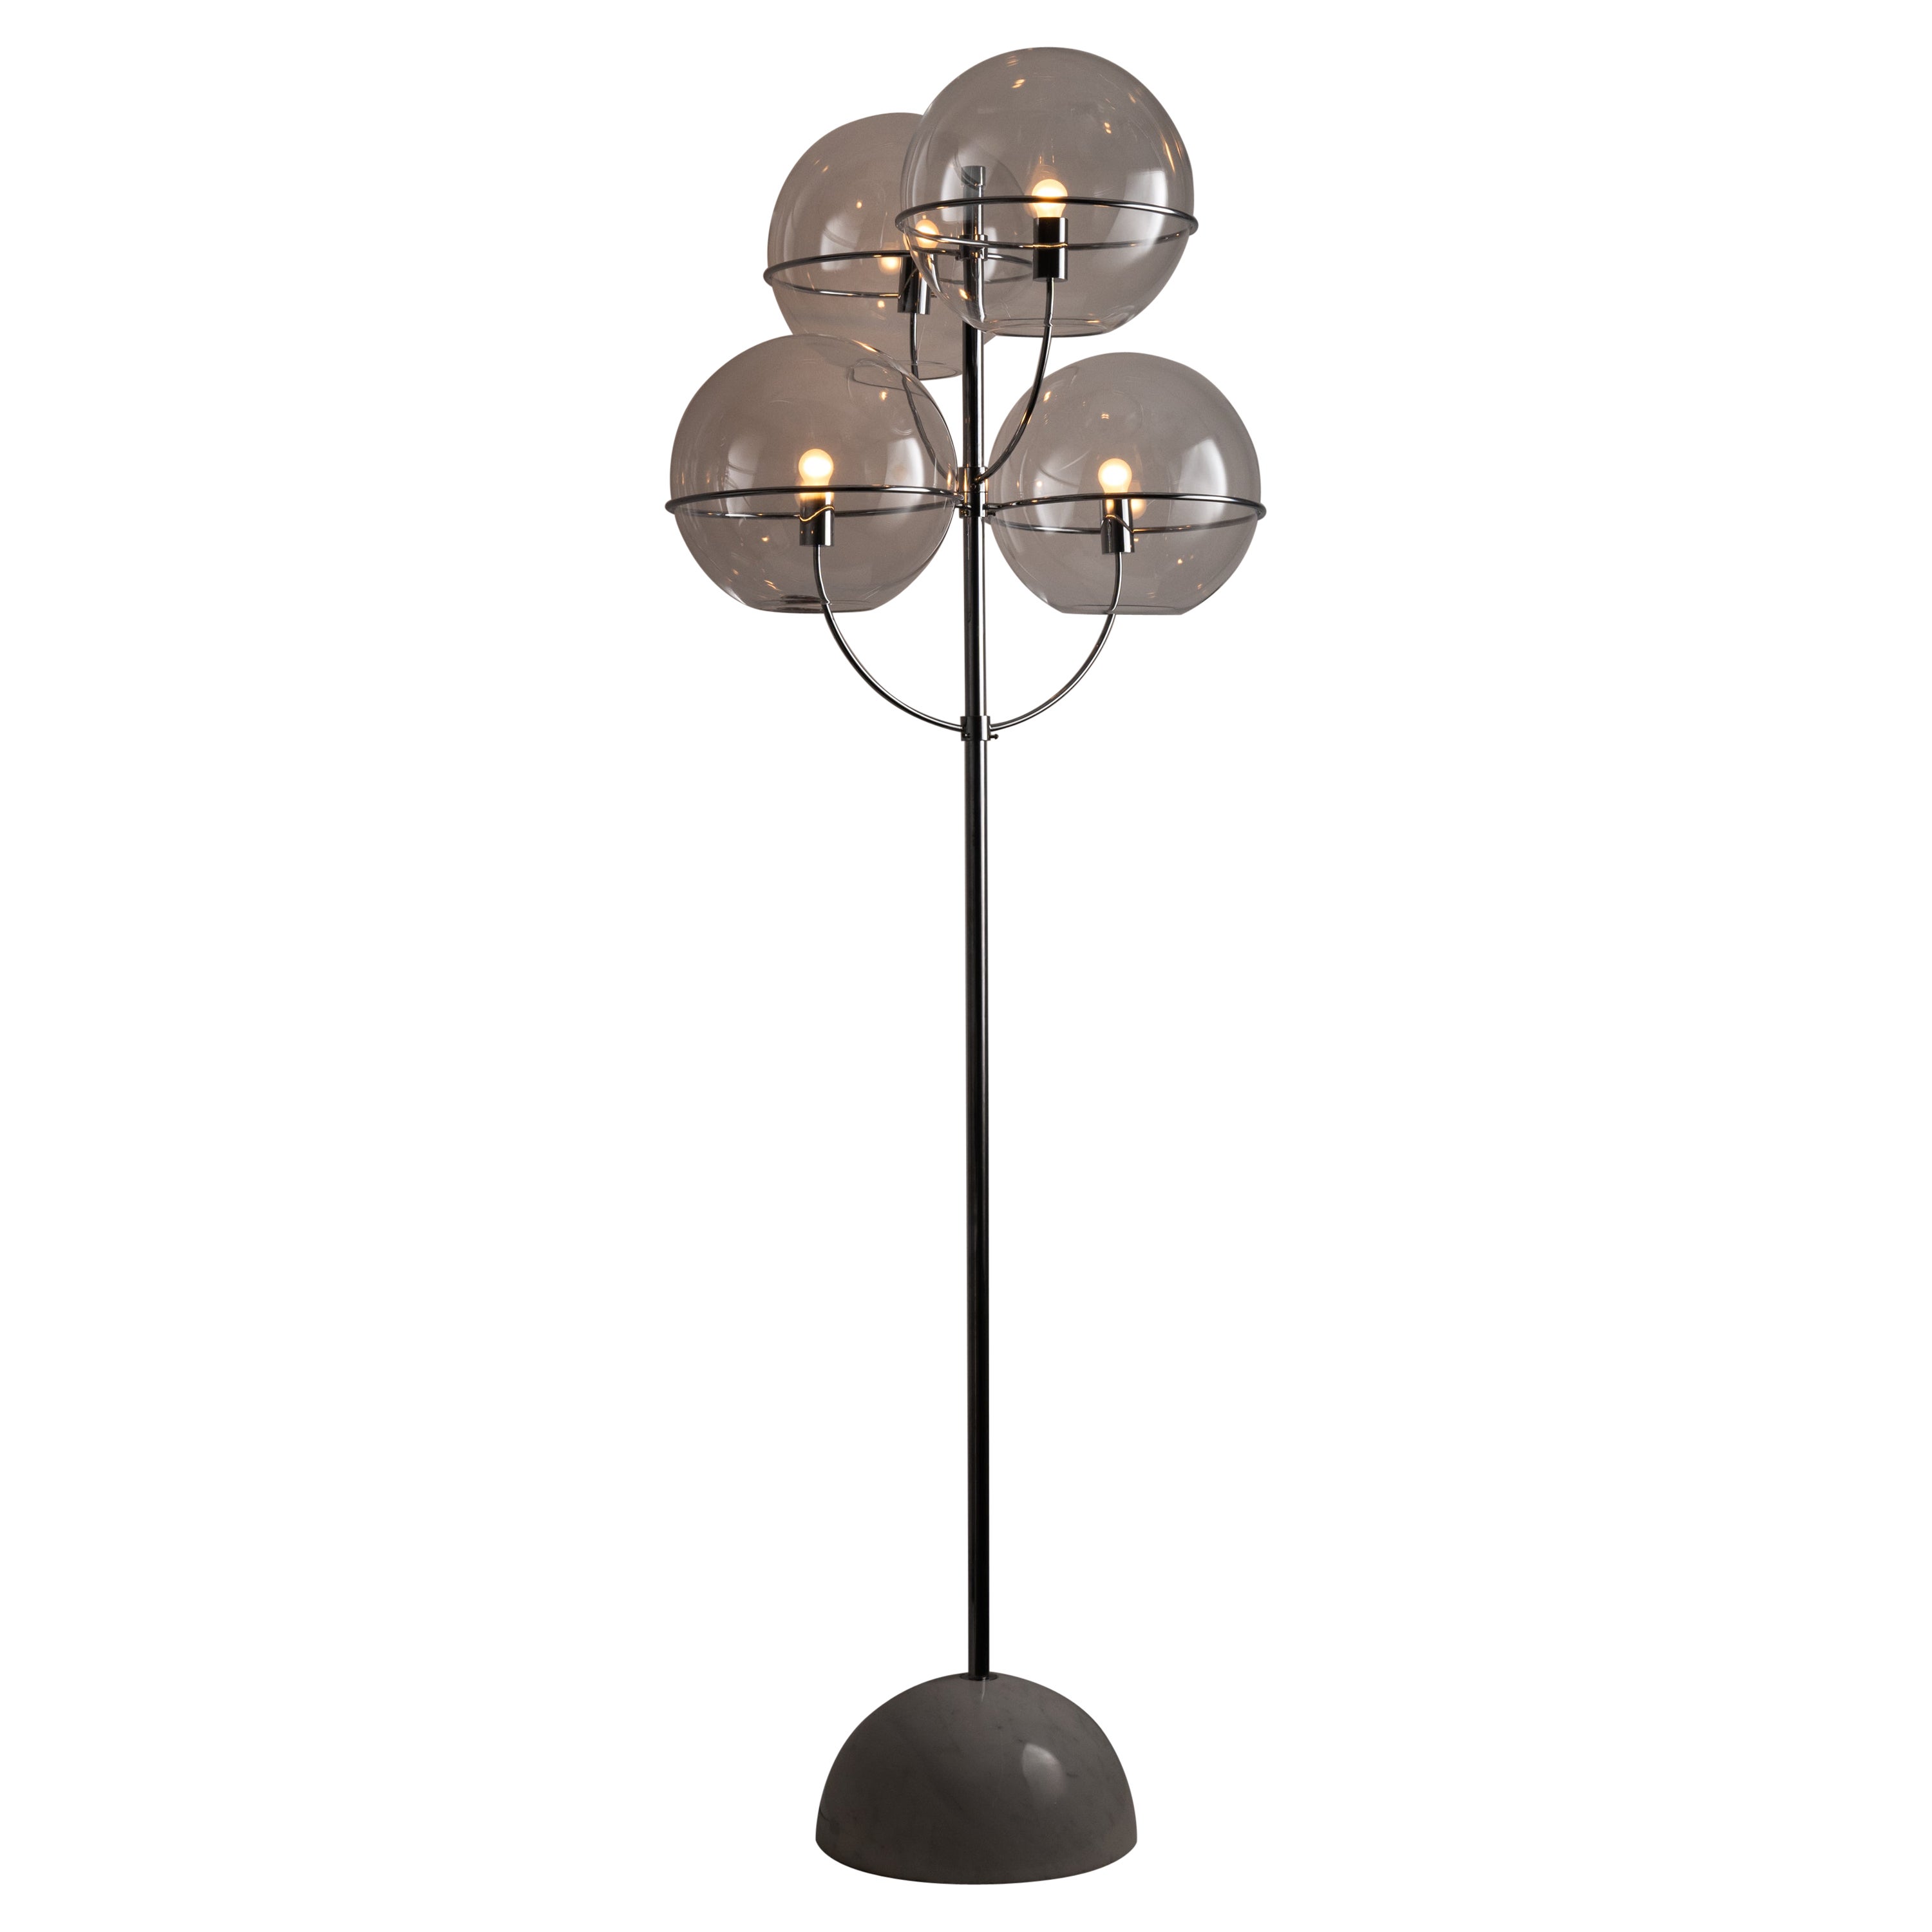 Large and Rare 'Lyndon' Floor Lamp by Vico Magistretti for Knoll